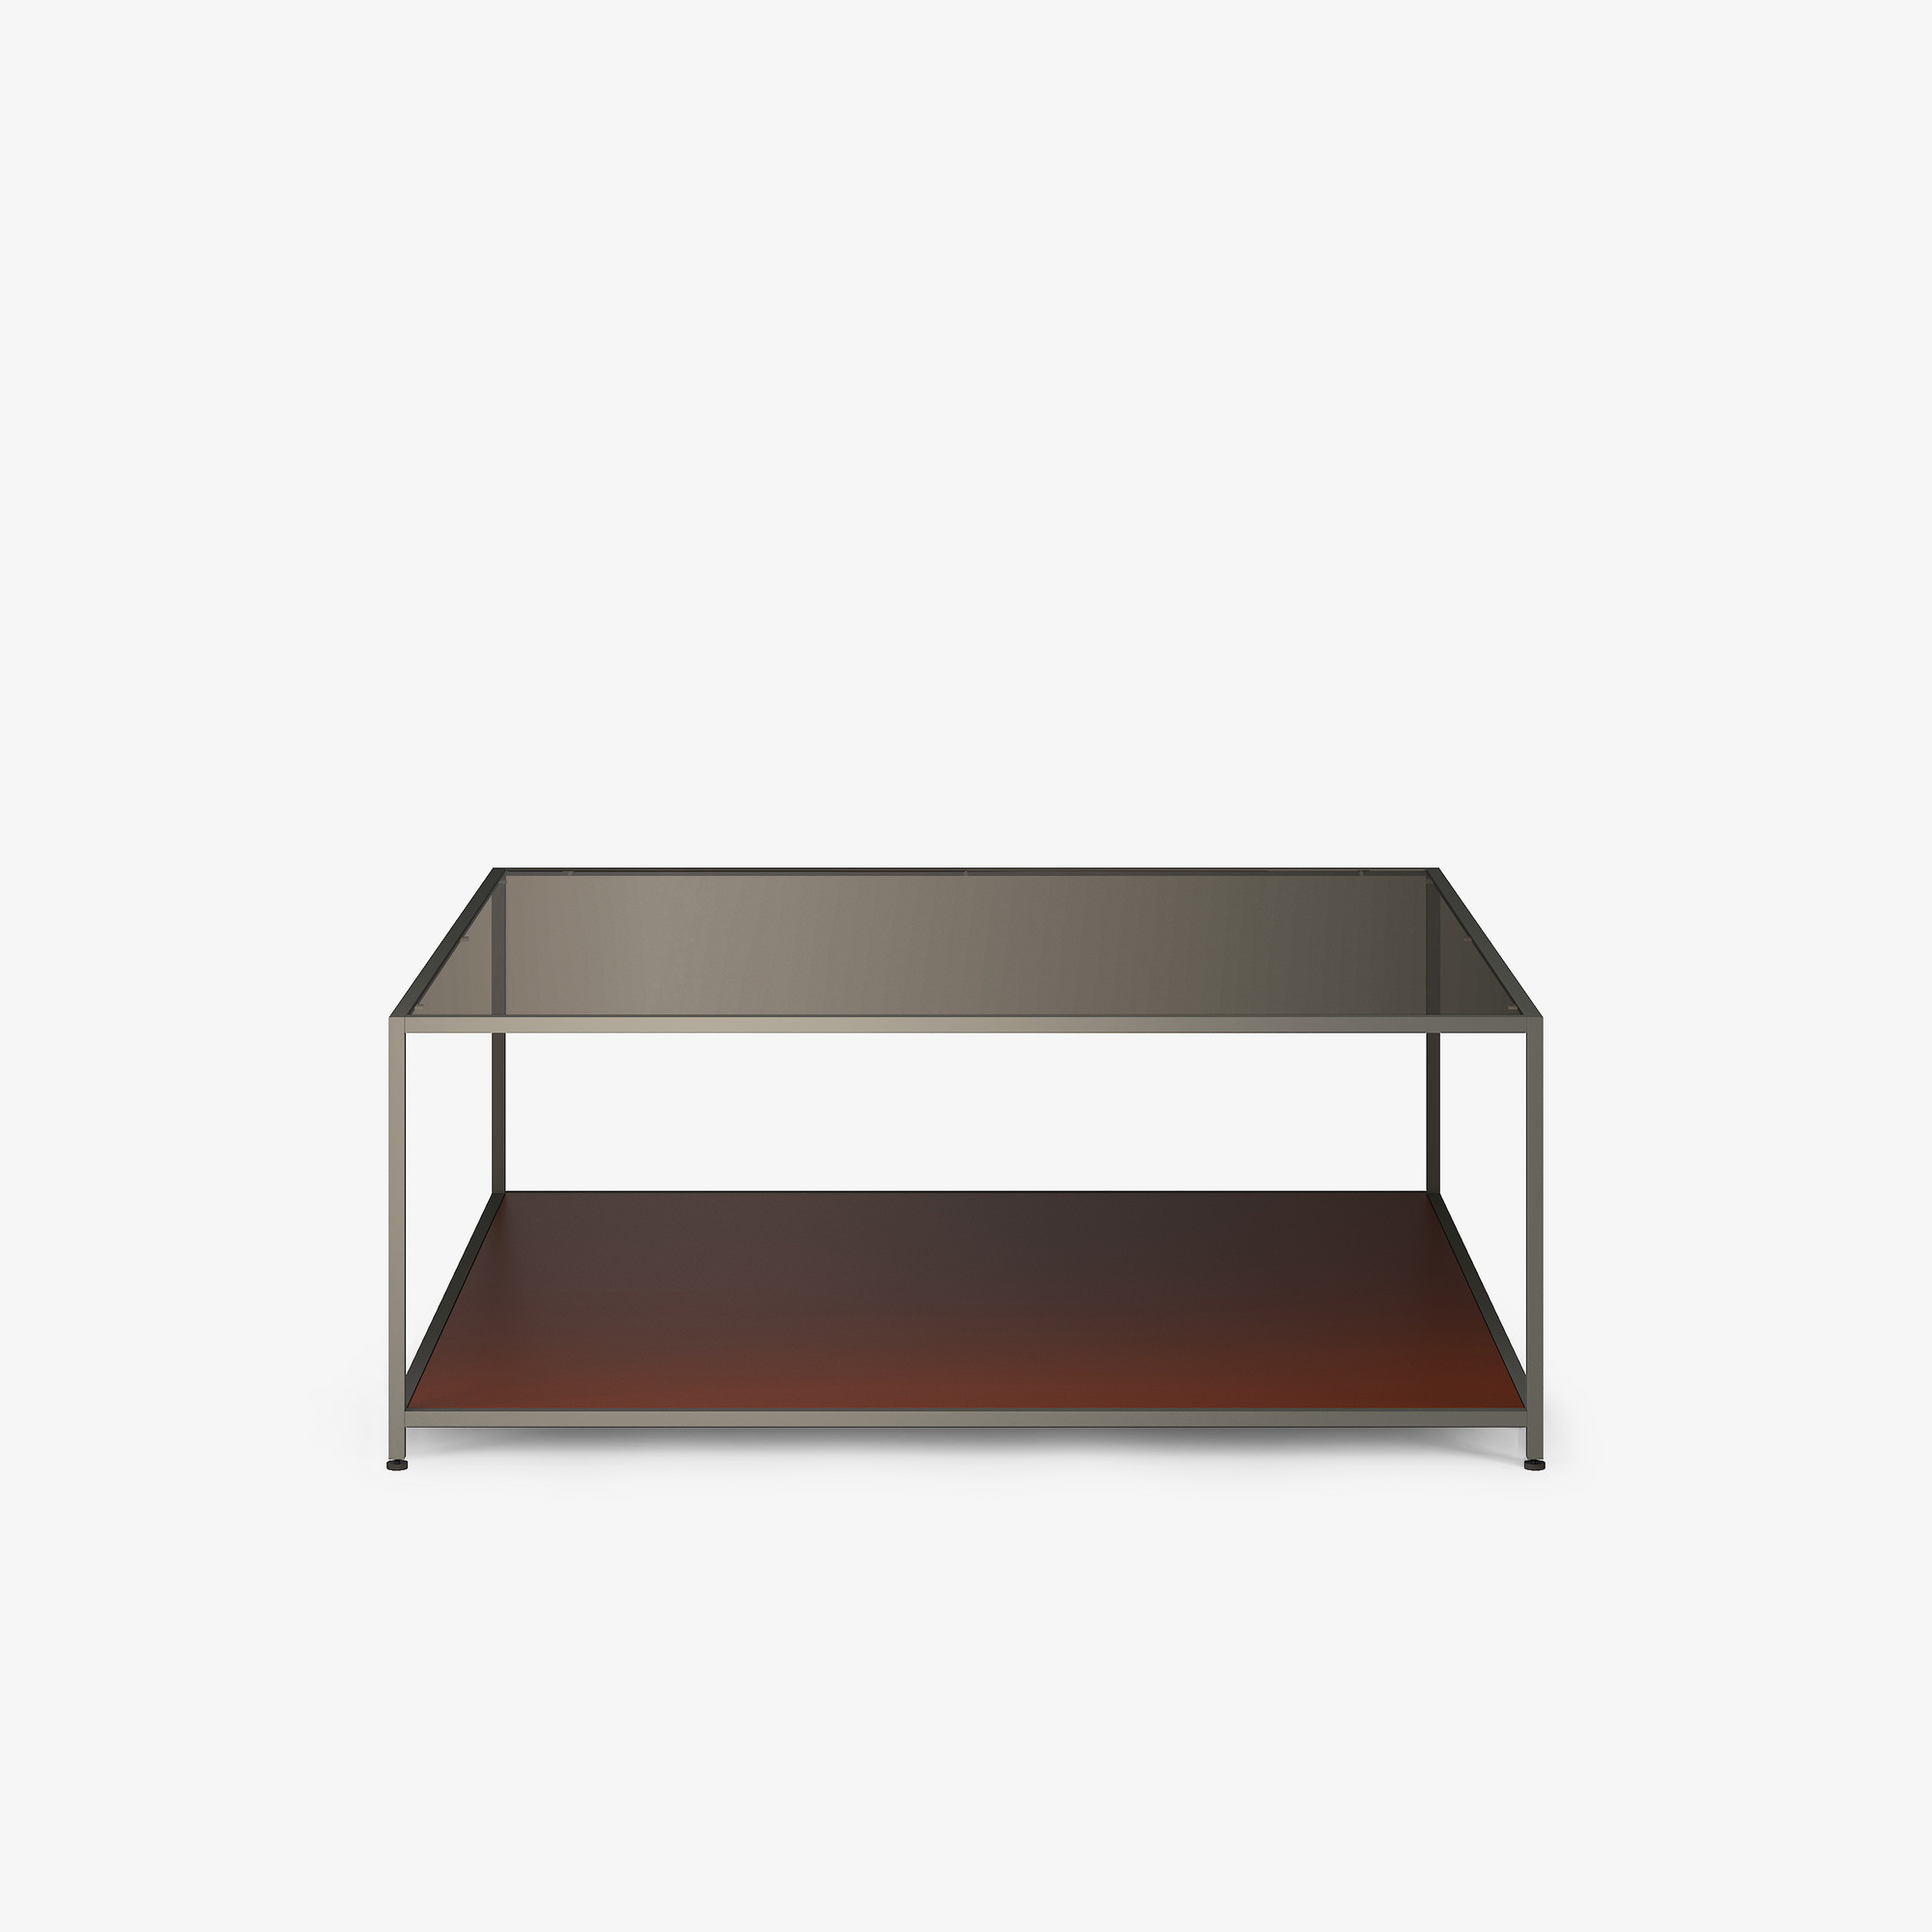 Image Square low table 4